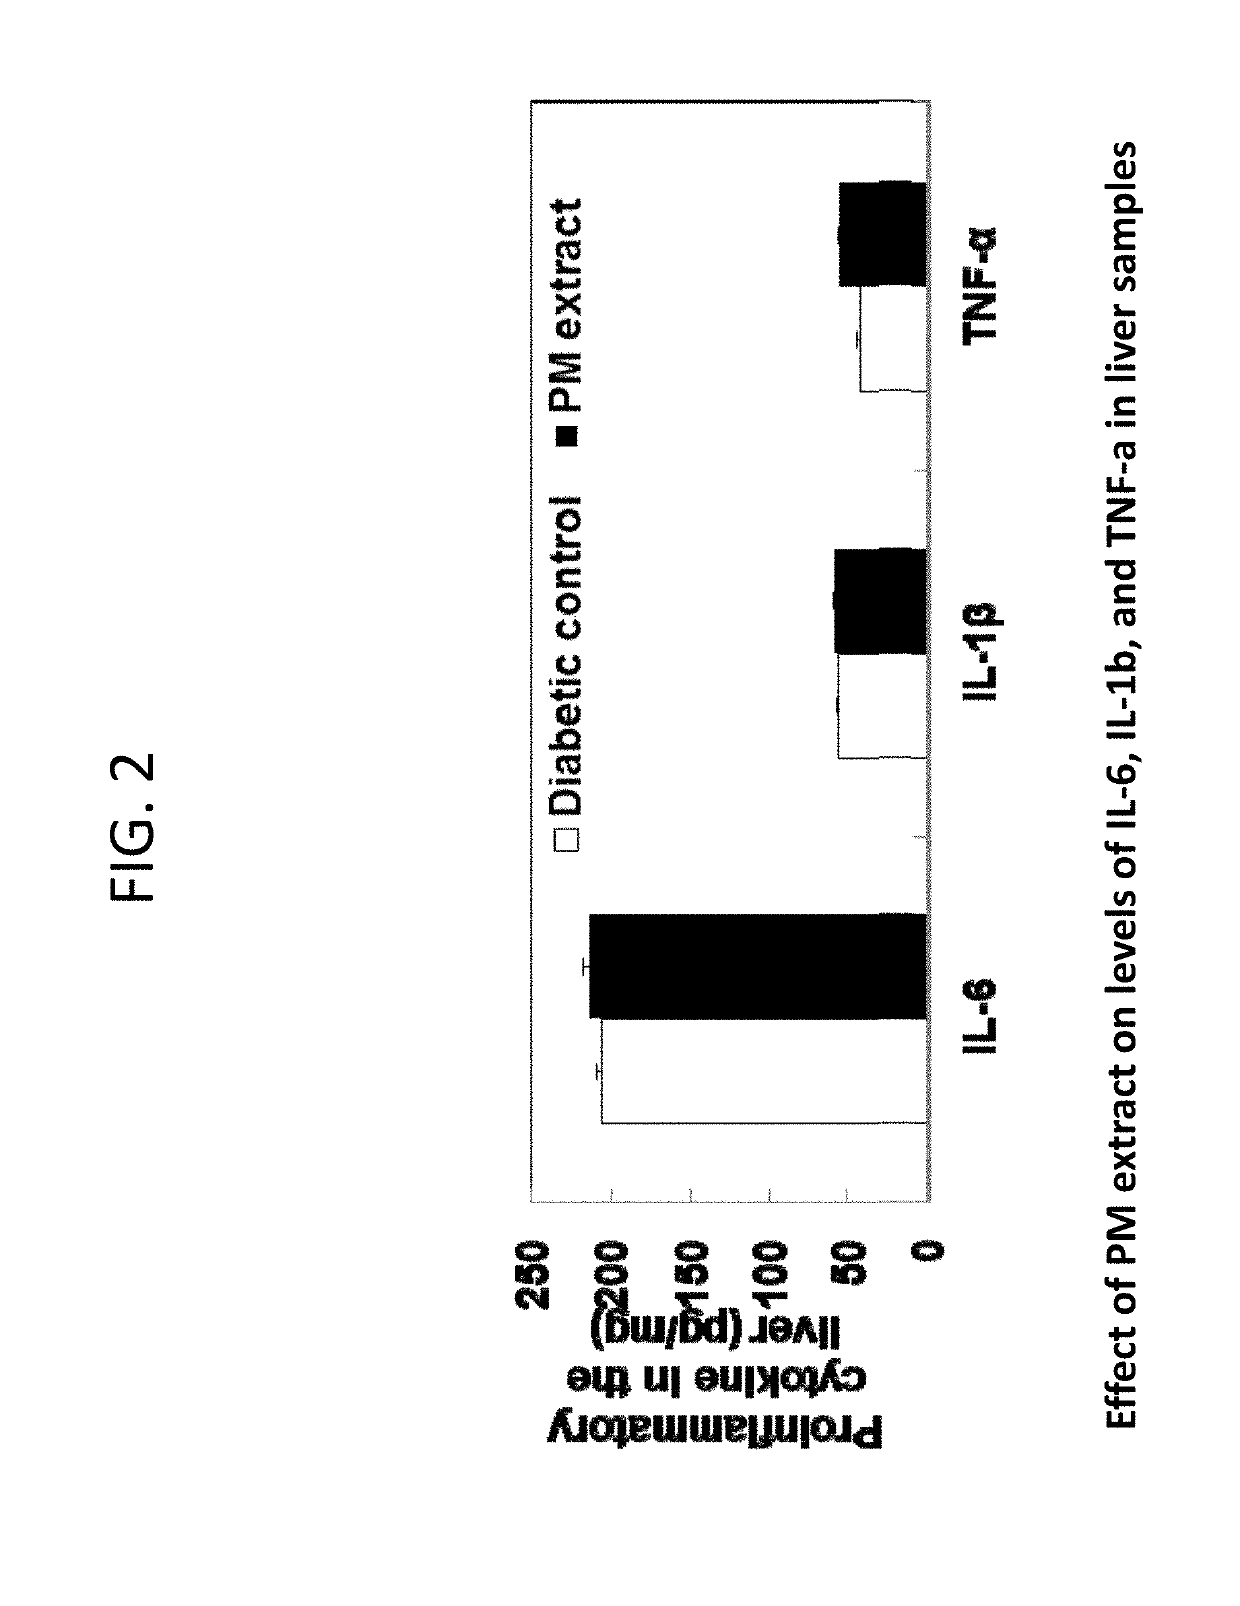 Composition containing stilbene glycoside and preparation and uses thereof for treating diabetes